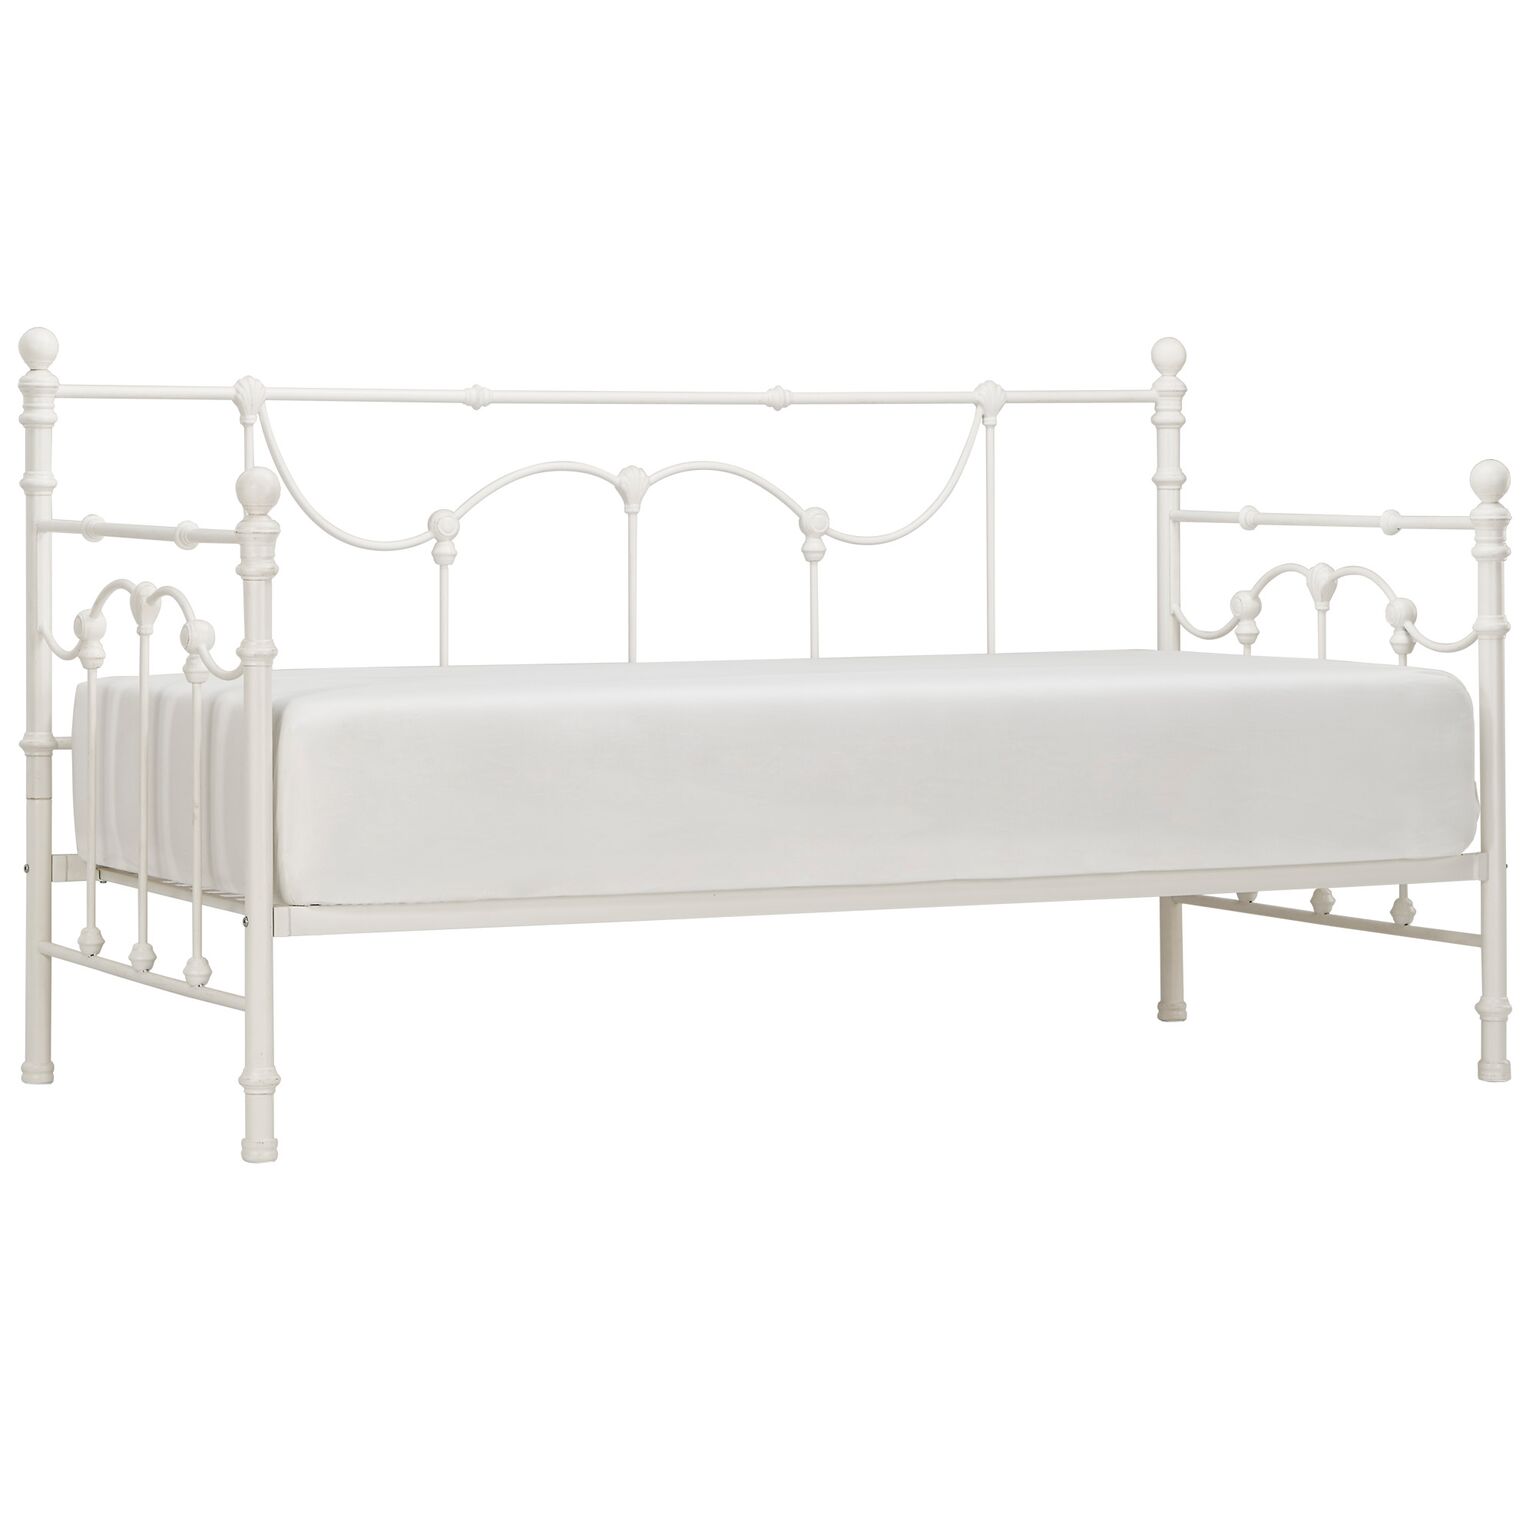 Weston Home Ossett Antique Finish Shell Motif Metal Twin Daybed, Antique White - image 3 of 7